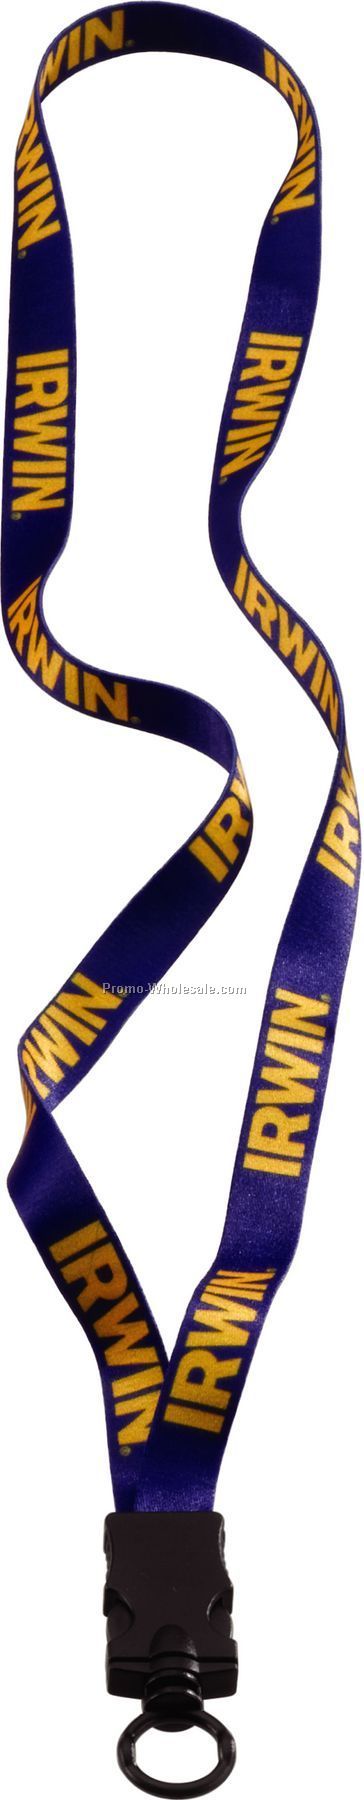 1/2" Recycled Dye Sublimated Lanyard With Snap Buckle Release & O-ring